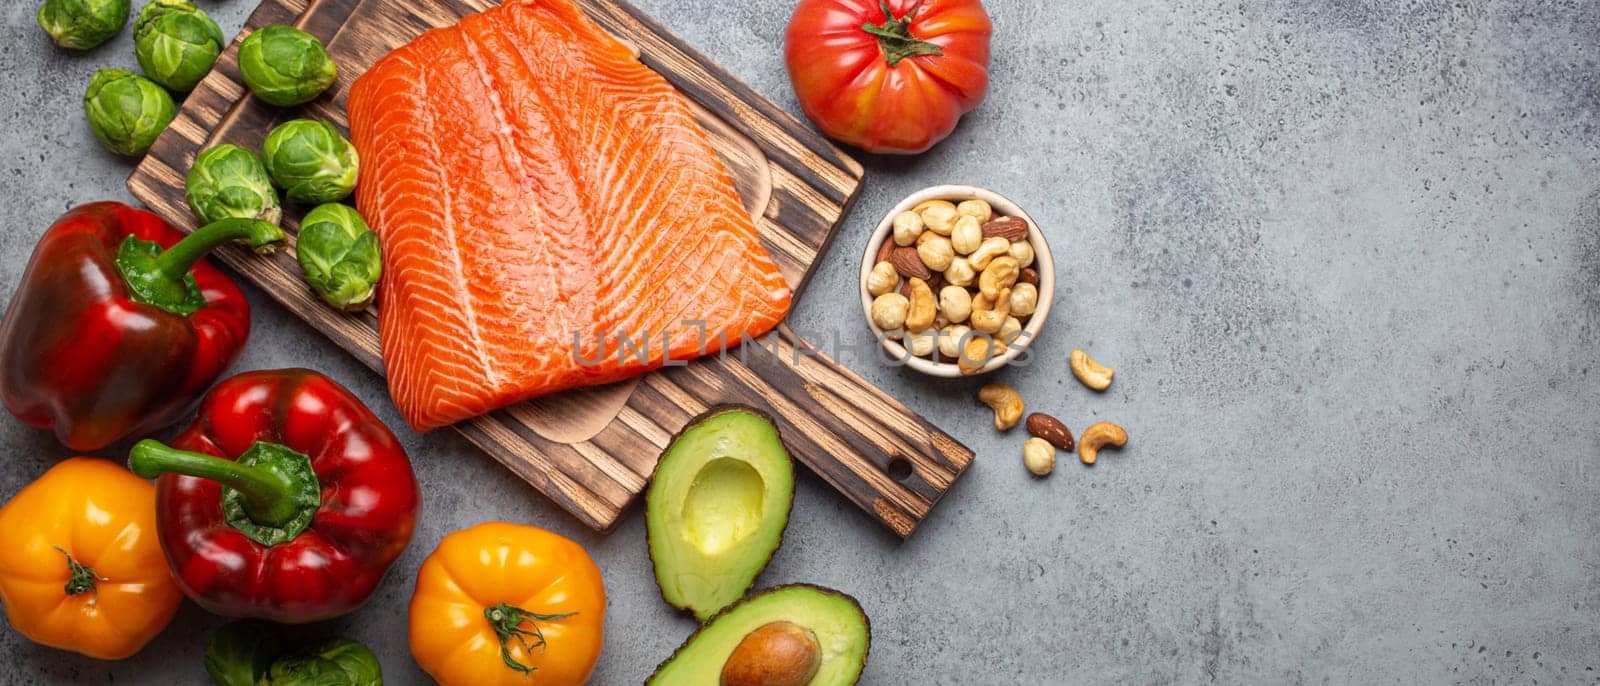 Fresh raw salmon fillet on wooden cutting board, organic bio vegetables and nuts, rustic stone grey background top view. Ingredients full of vitamins for healthy diet and nutrition, space for text by its_al_dente